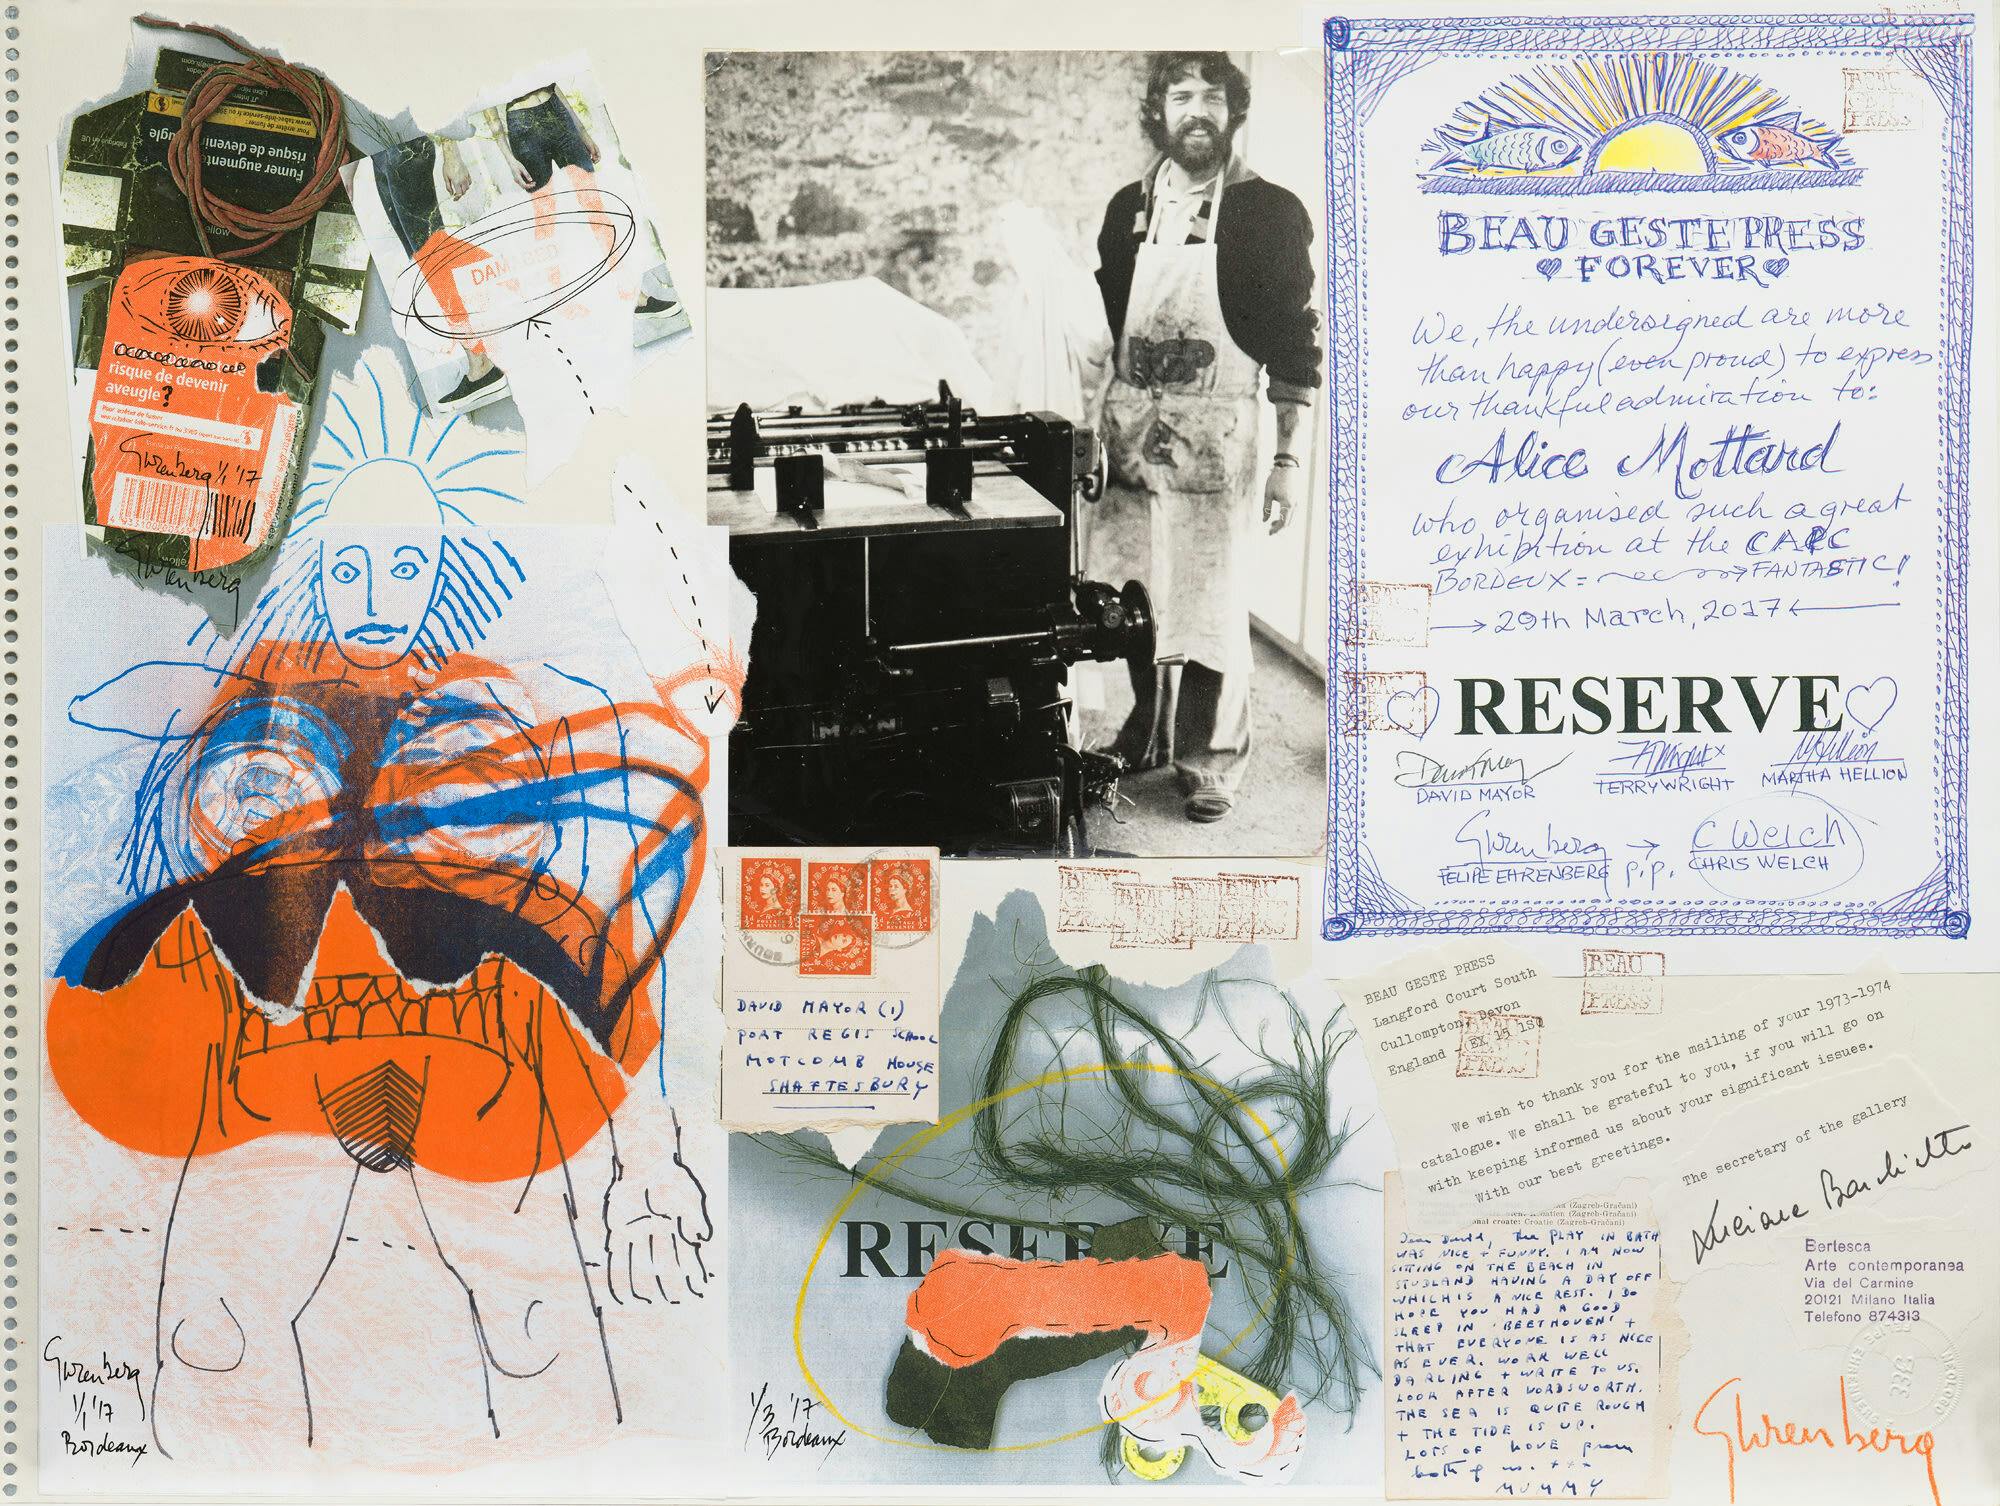 A collage showing fragments of drawings, letters and photos, overlaid with handwritten text.